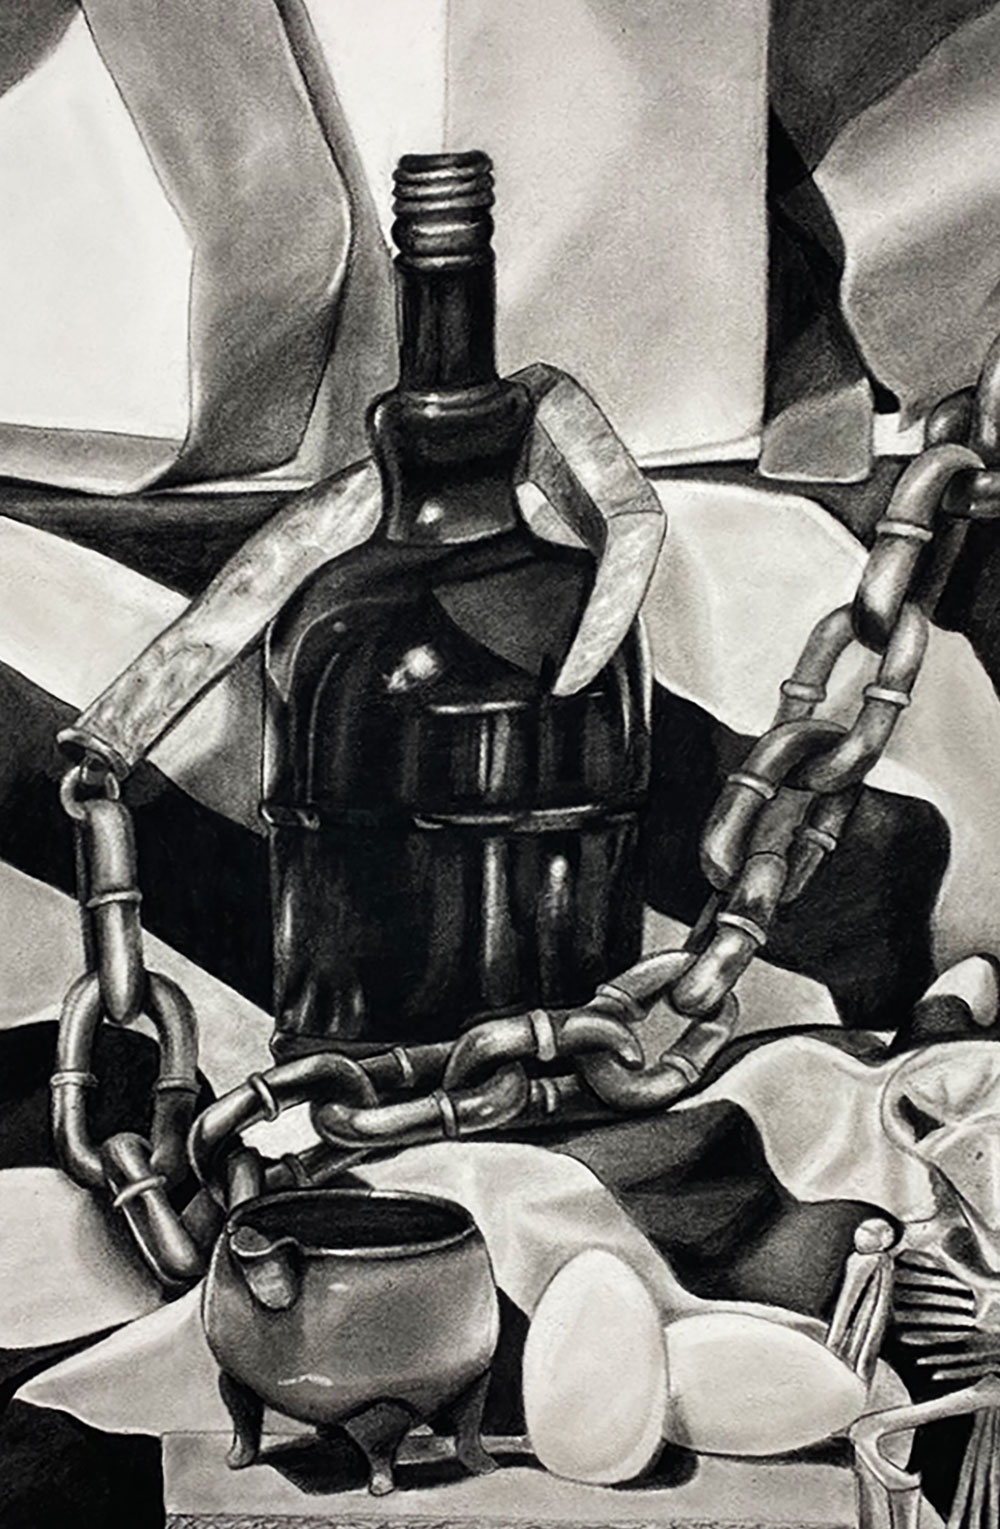 Charcoal drawing of still life includes: a bottle, chain, and two eggs.